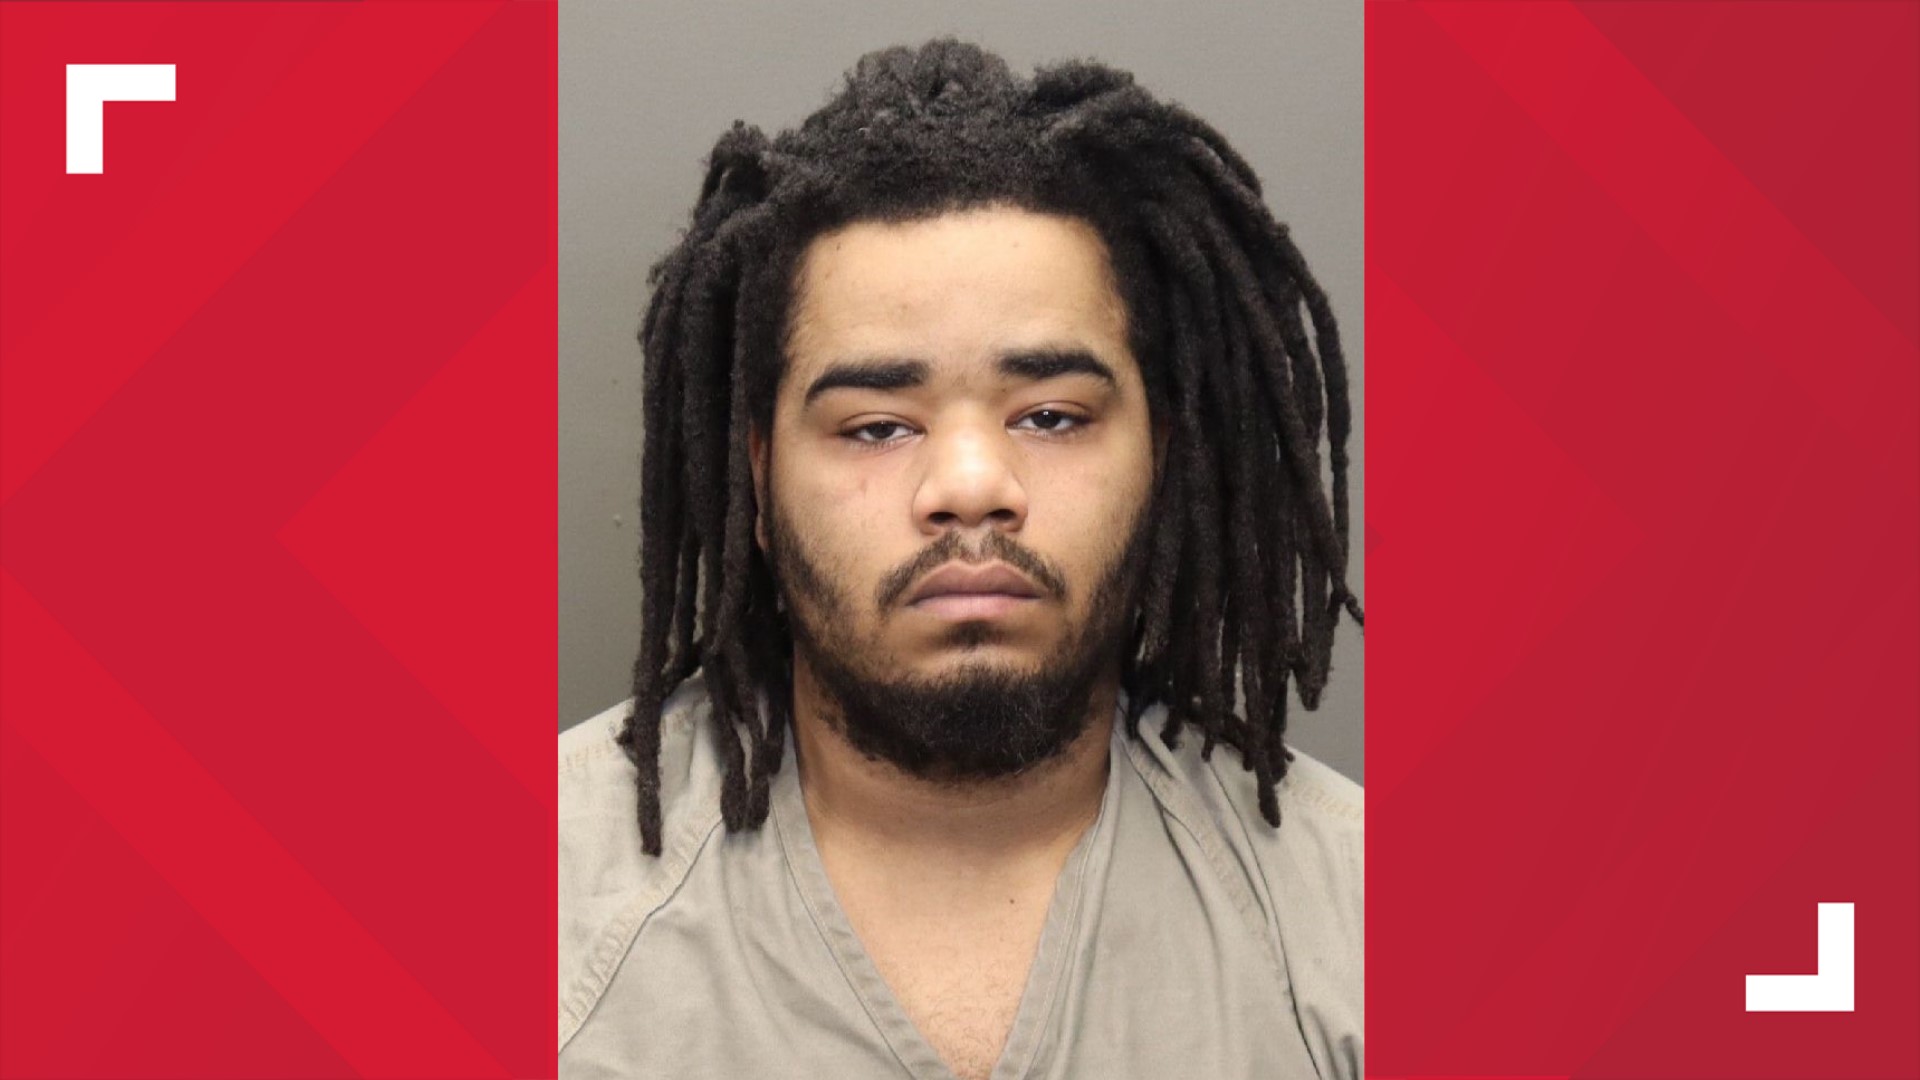 Malike Miller is charged with murder for the shooting of 23-year-old Jared Porter on March 3.